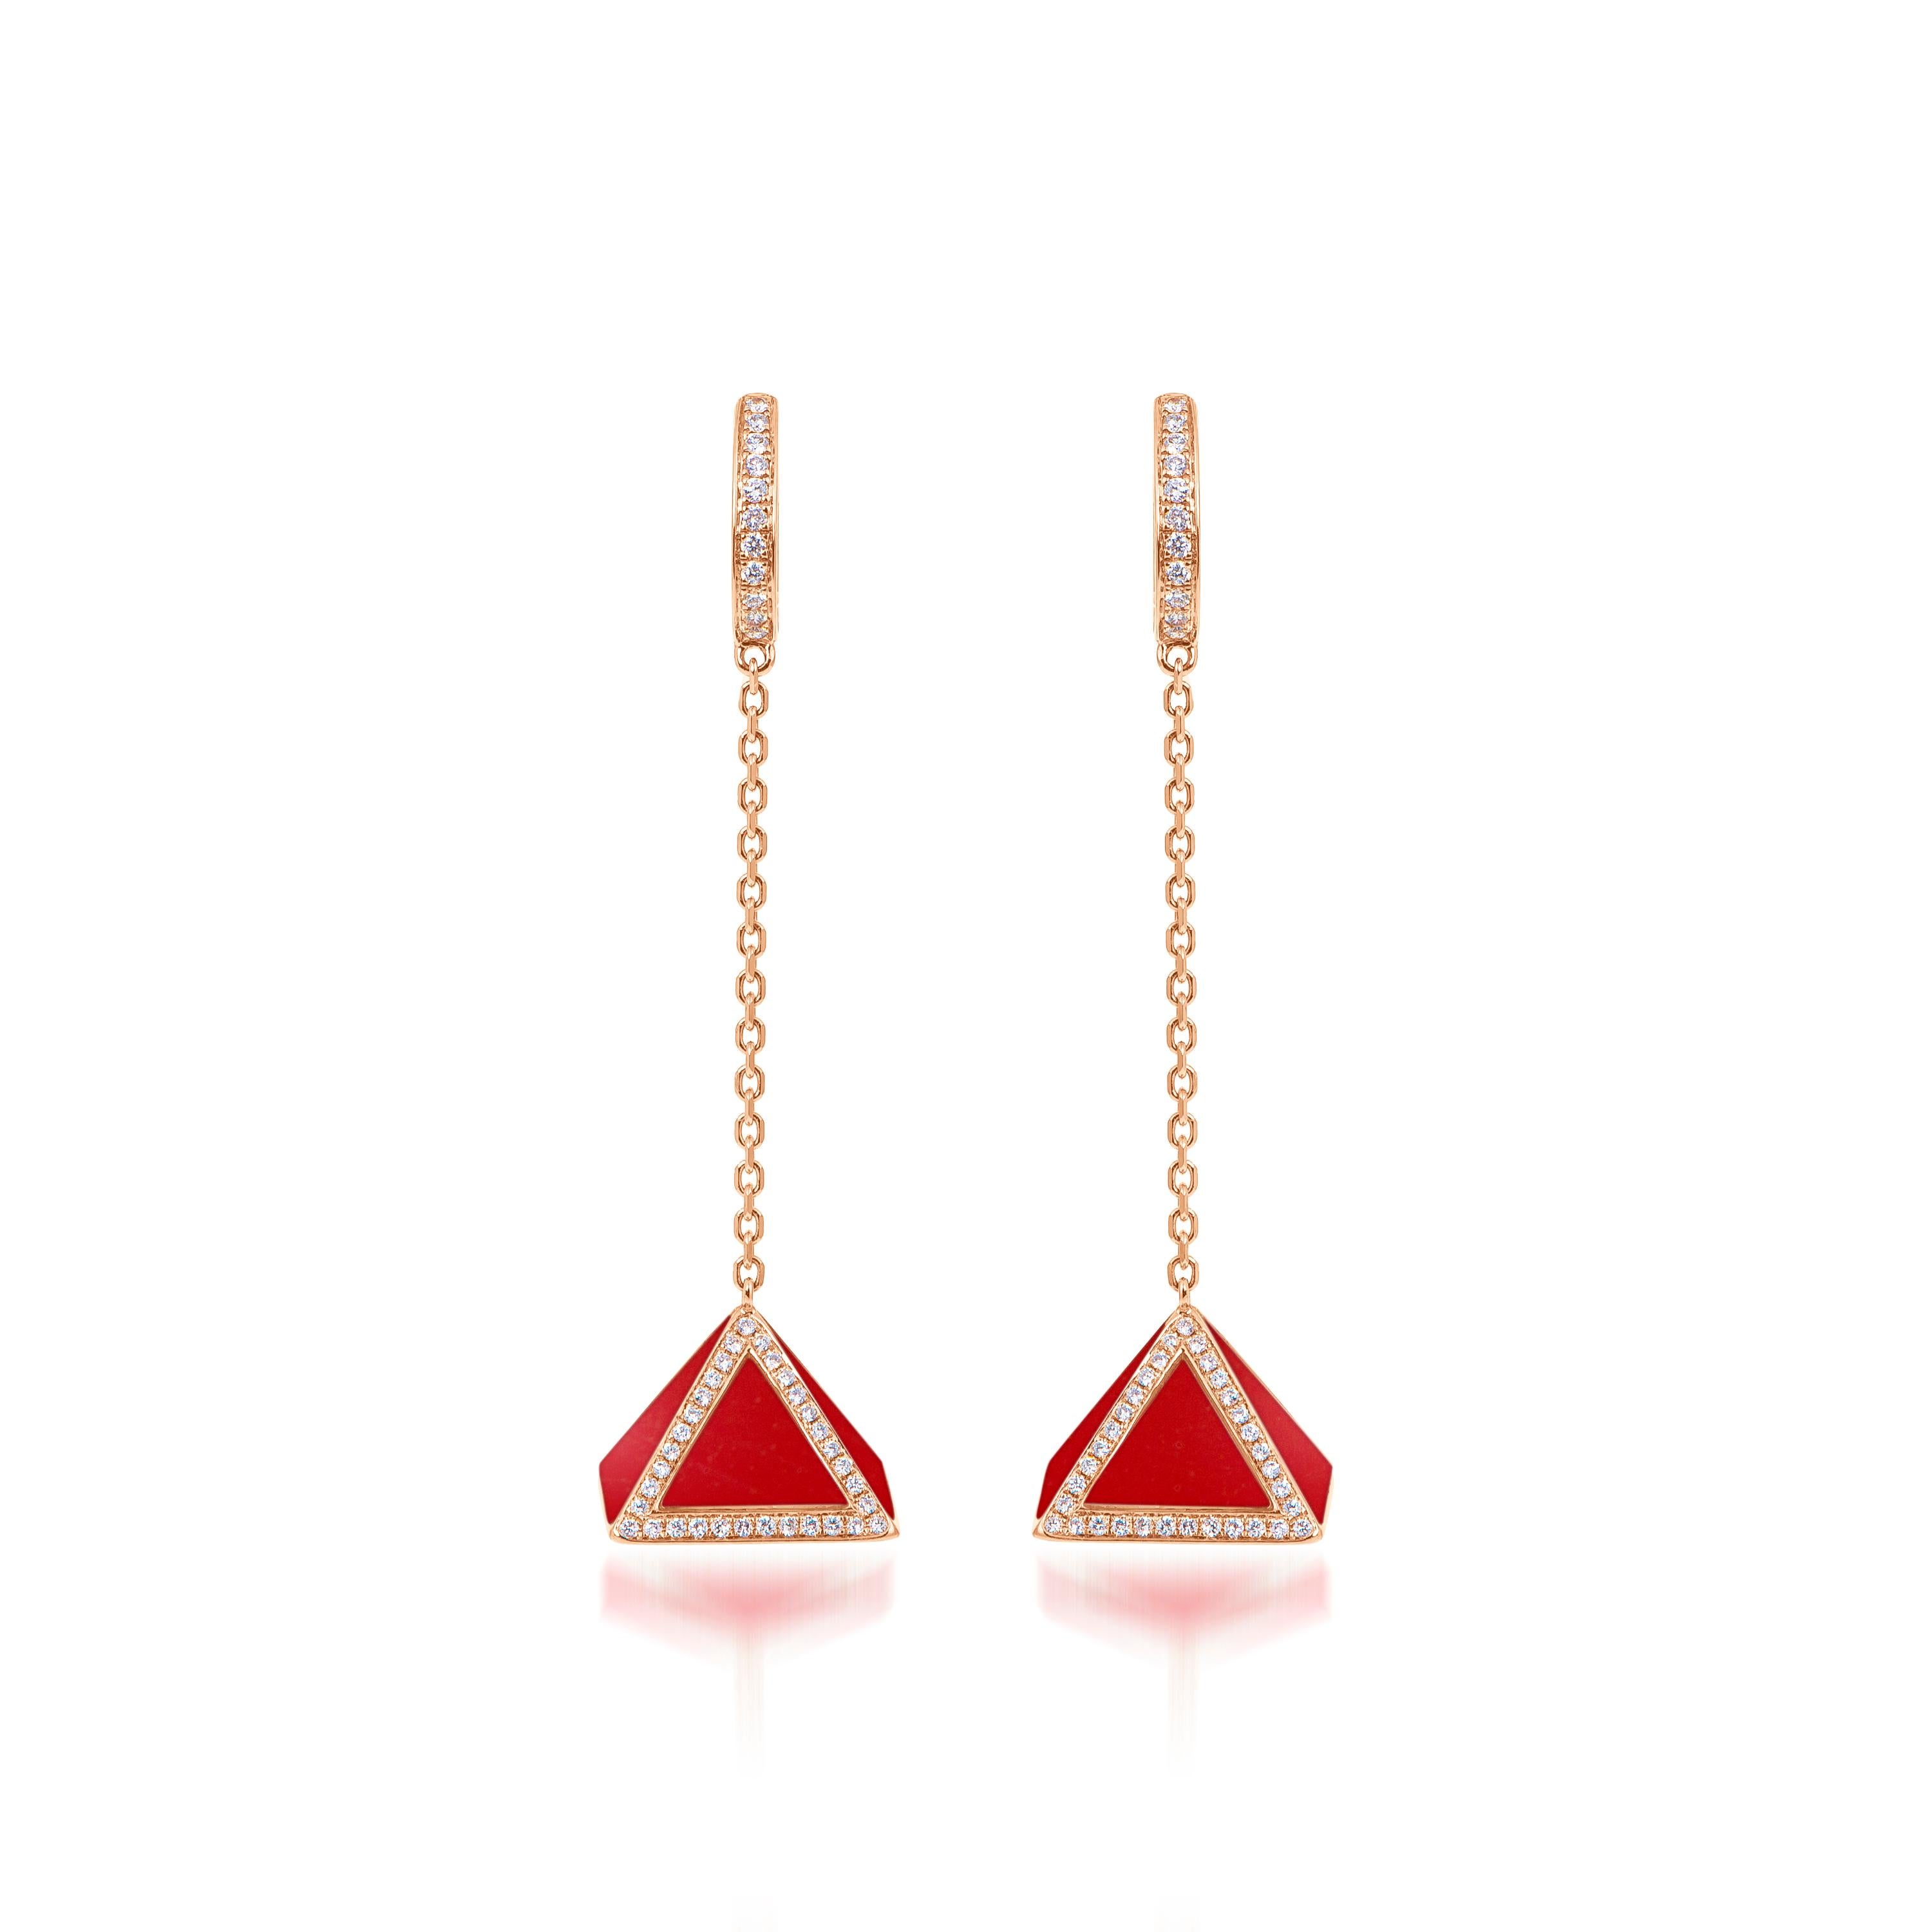 Through graphic, contemporary lines, Butani’s Tetra collection celebrates the beauty of symmetry while reimagining classic motifs of the past. 

Inspired by the strength and stability of pyramids, the Tetra Tribus Earrings drop gracefully below the